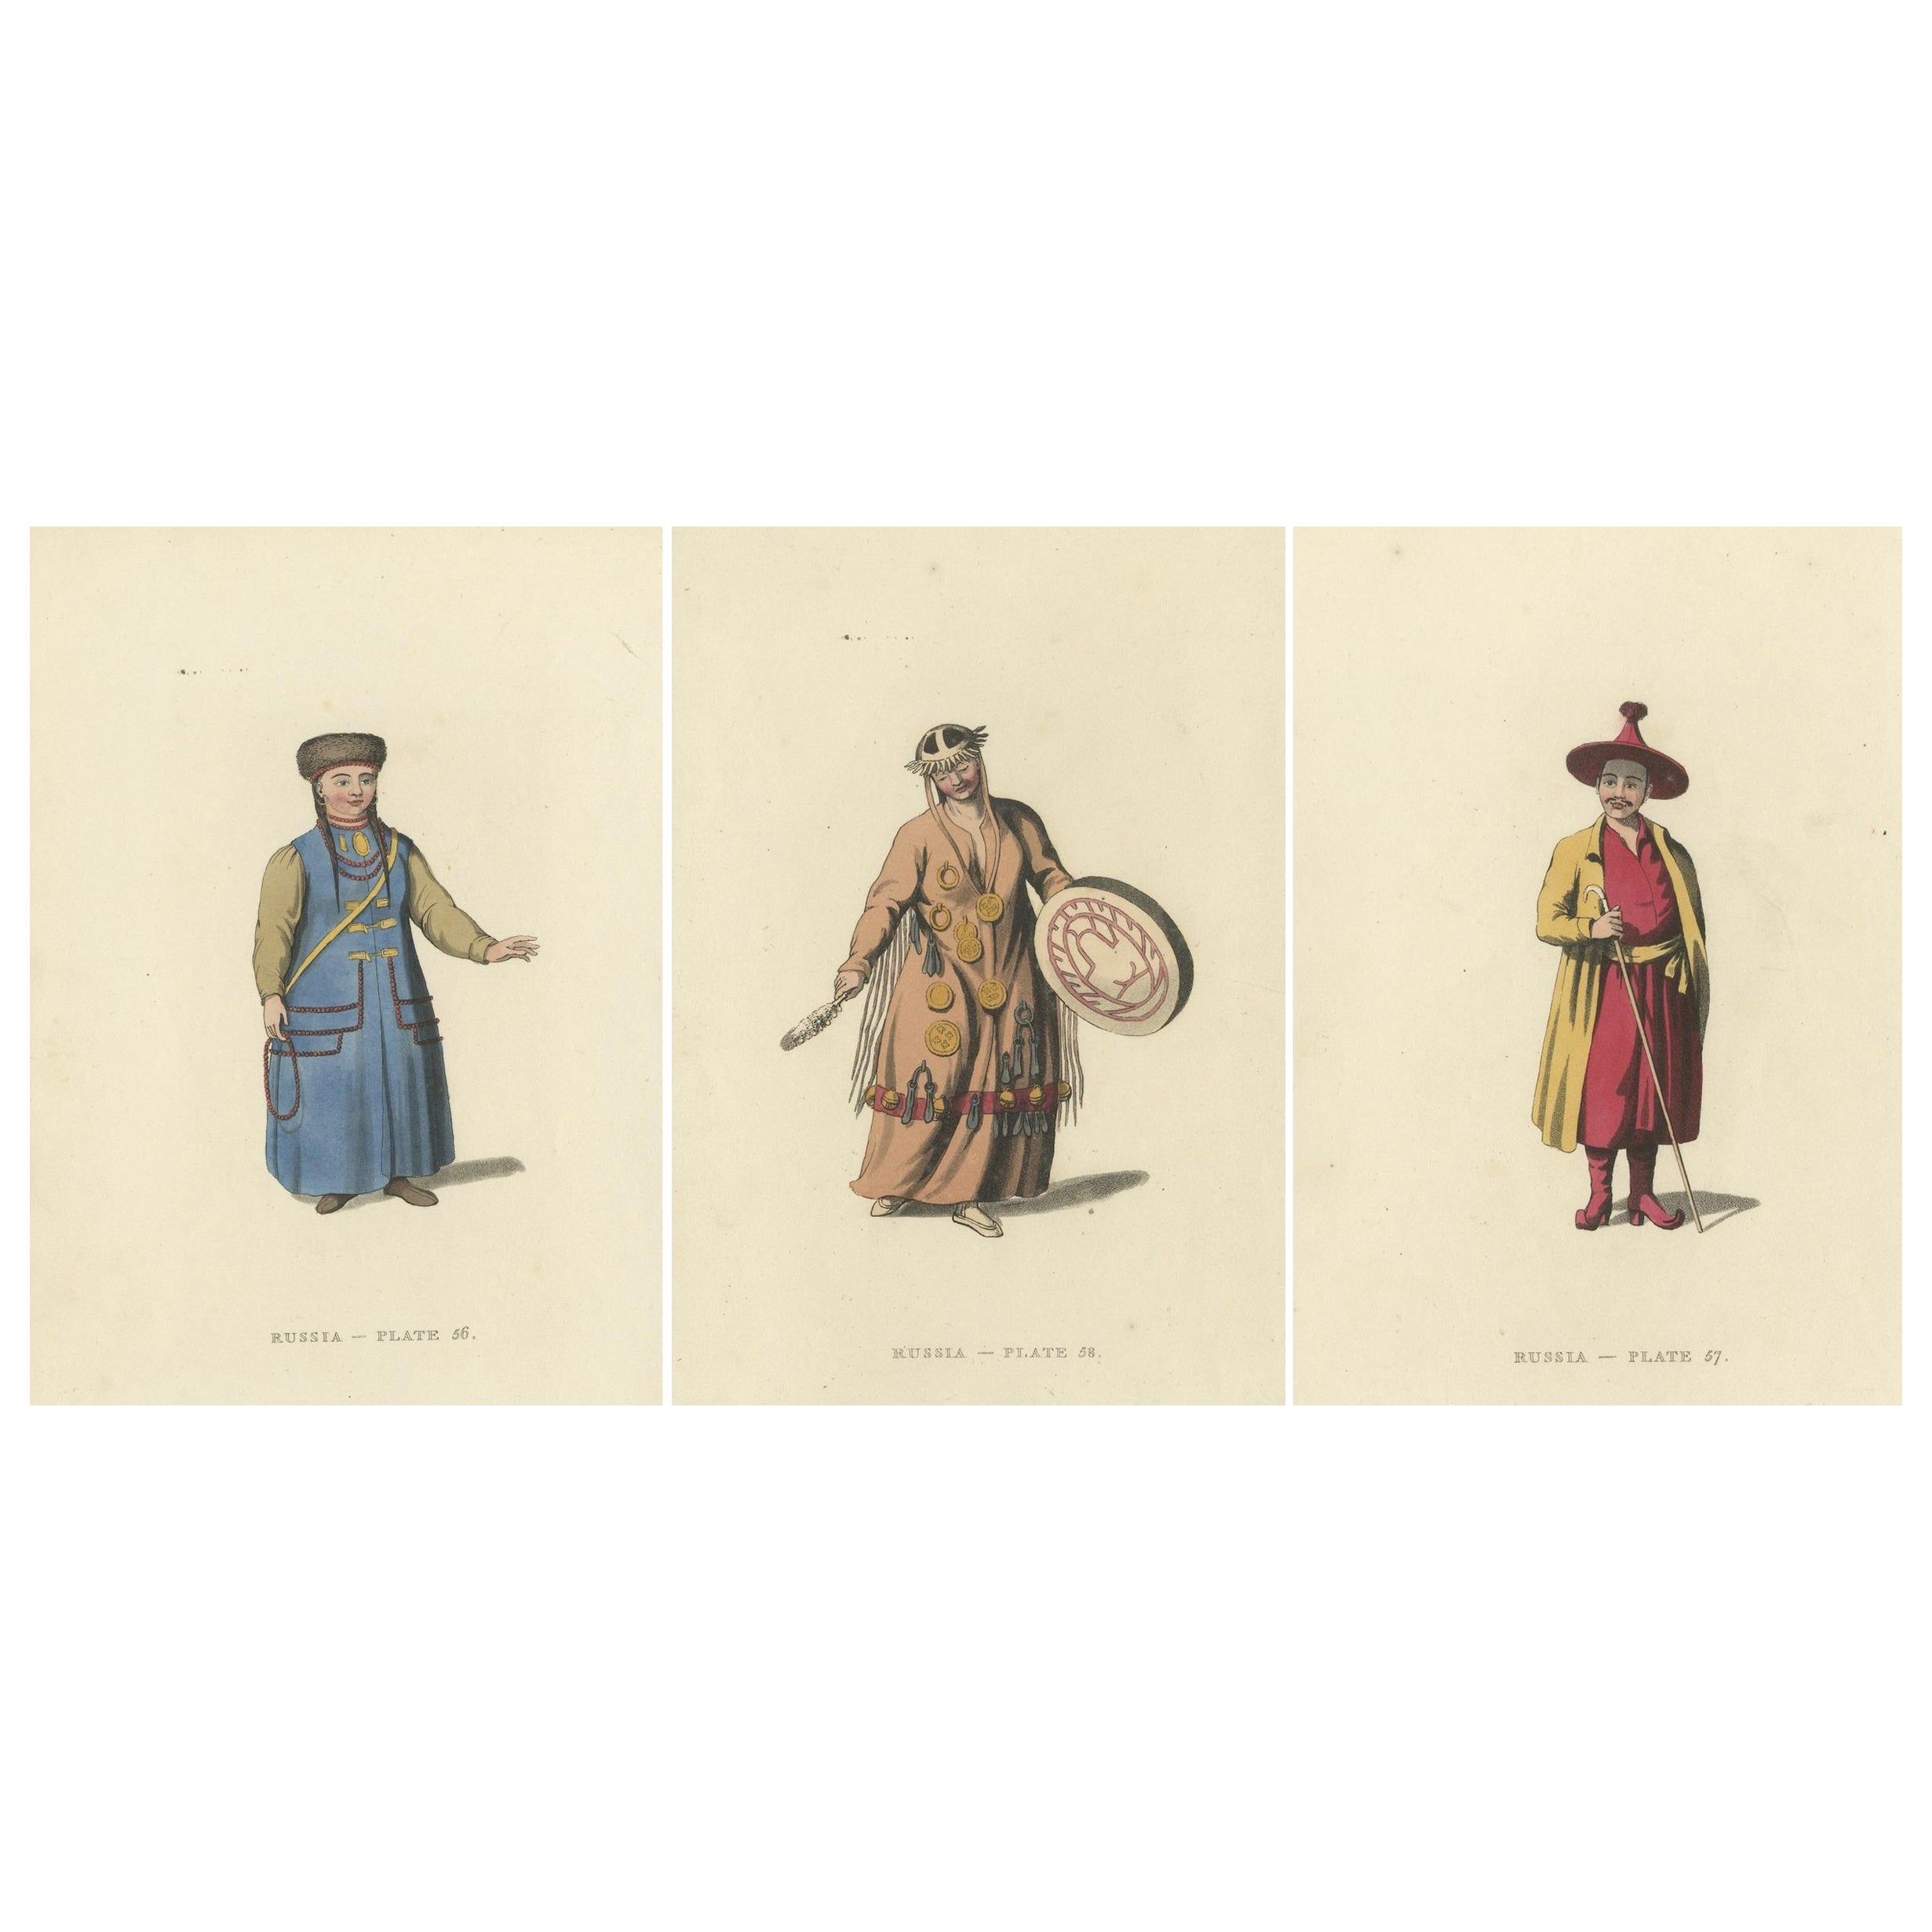 Traditional Mongolian Attire in Alexander's Russian Ethnographic Engraving, 1814 For Sale